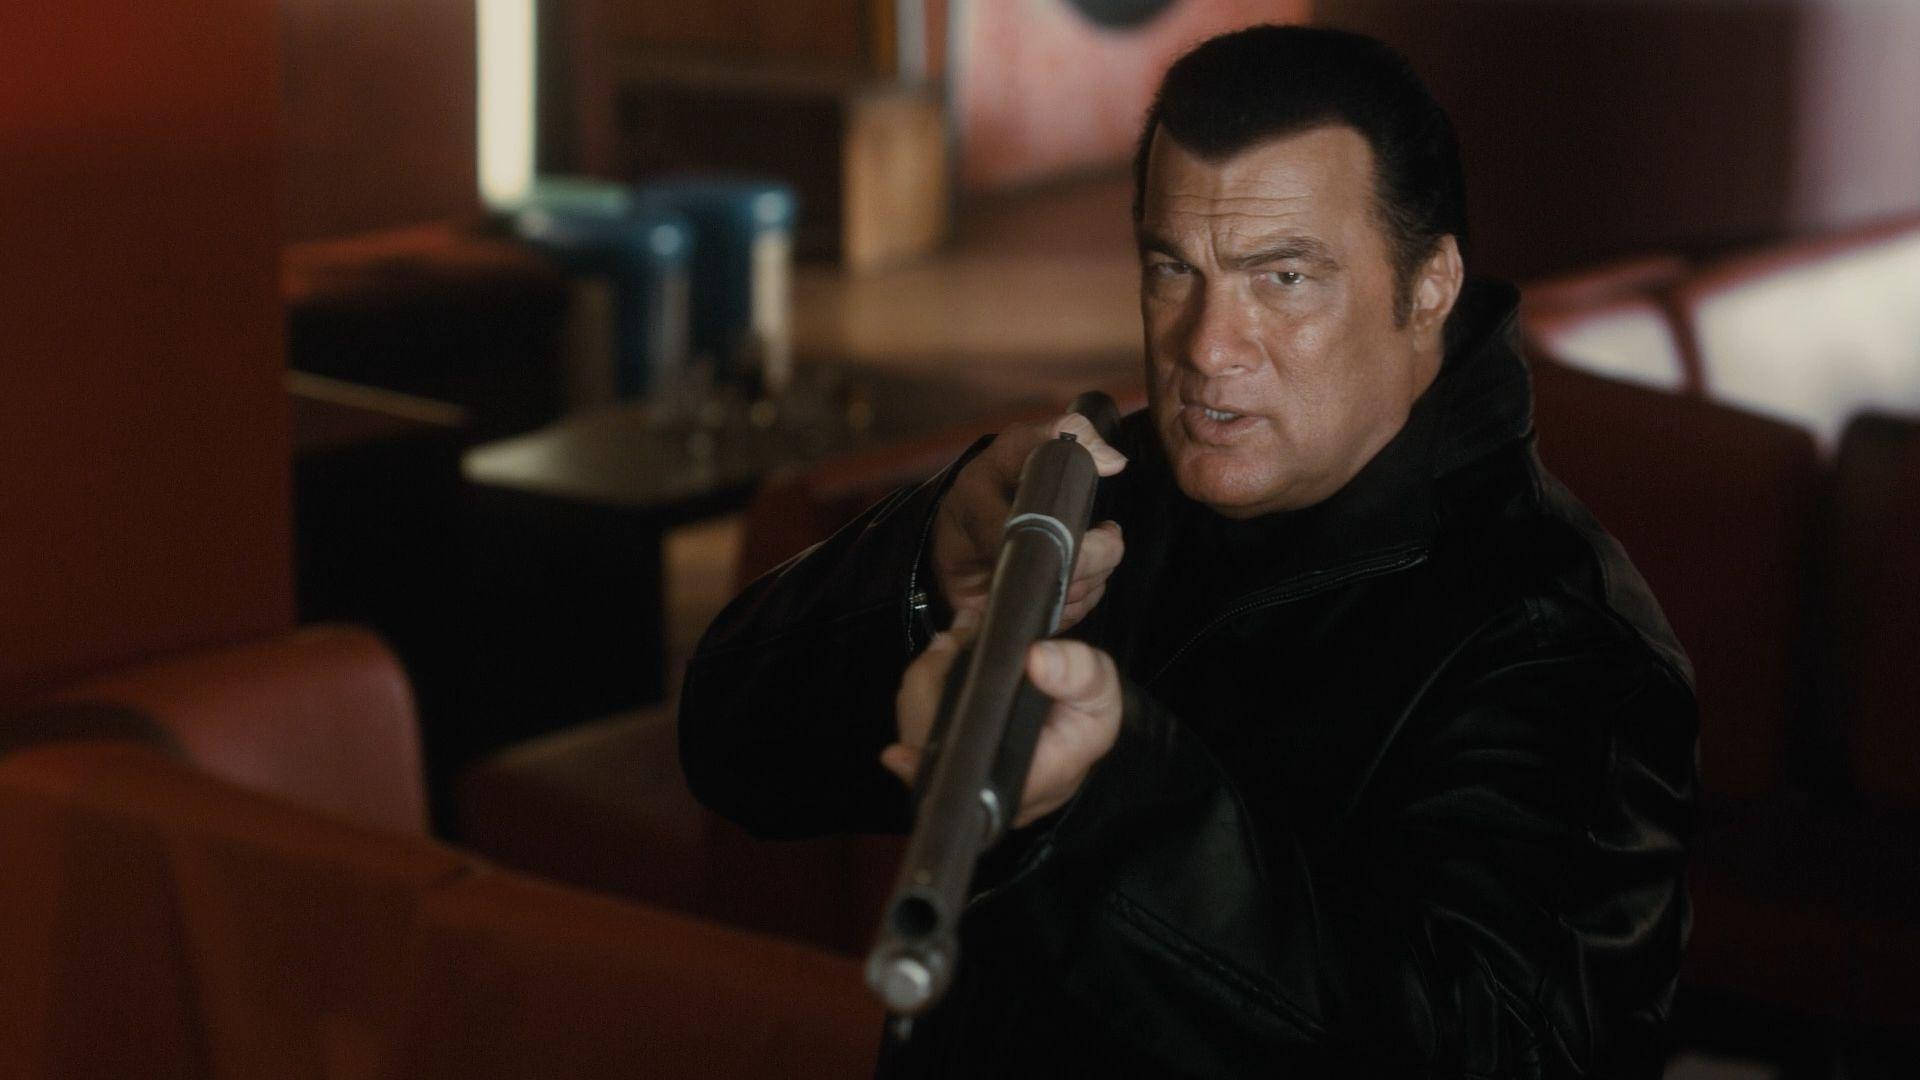 Steven Seagal American Action Star Background